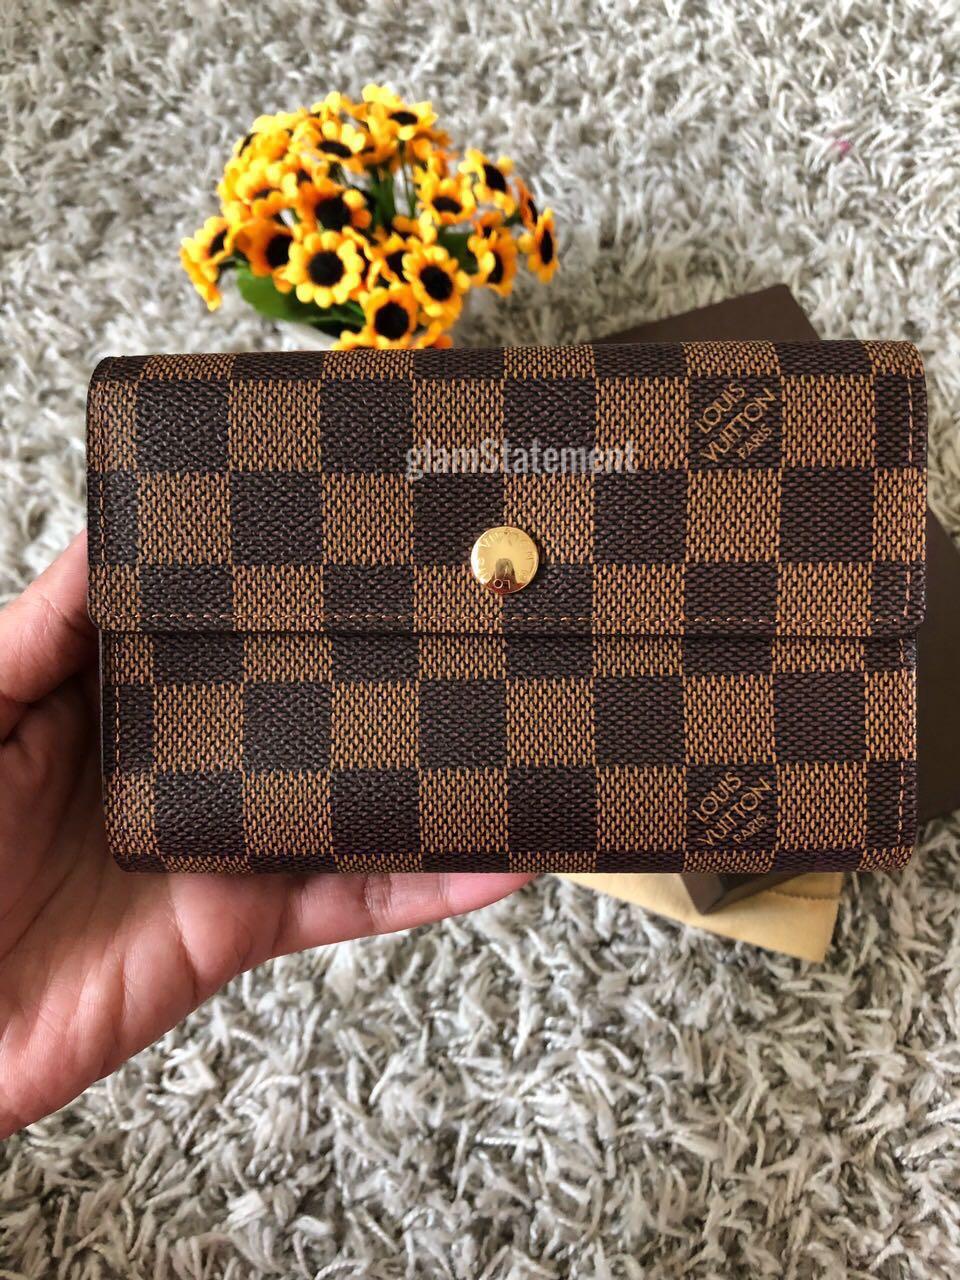 Louis Vuitton - Authenticated Alexandra Wallet - Brown for Women, Good Condition